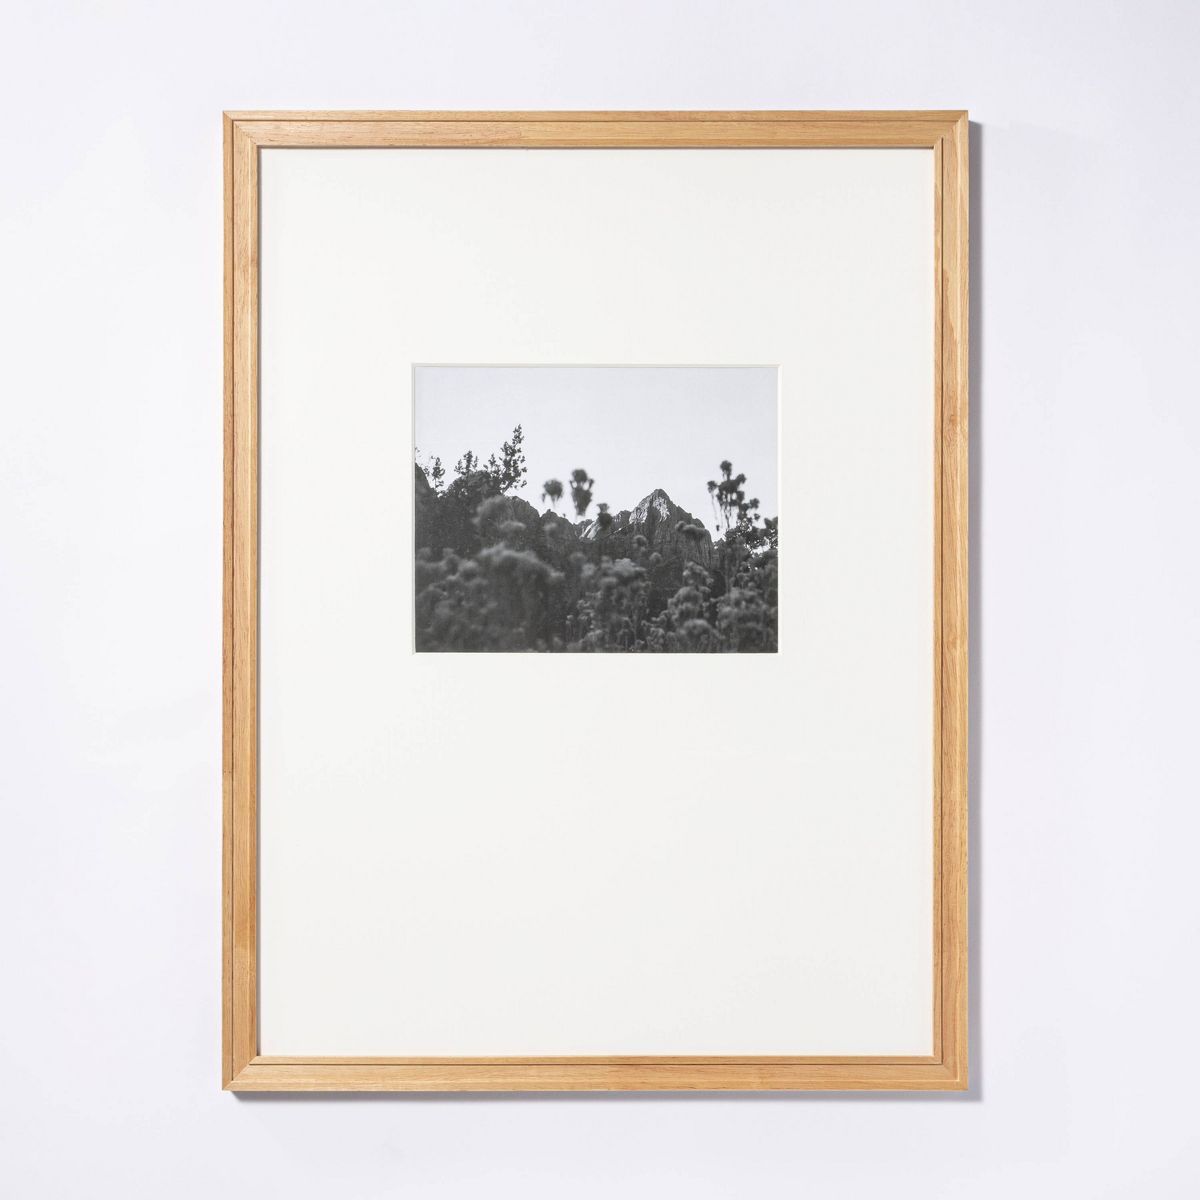 18" x 24" Matted to 8" x 10" Gallery Frame Natural Wood - Threshold™ designed with Studio McGee | Target